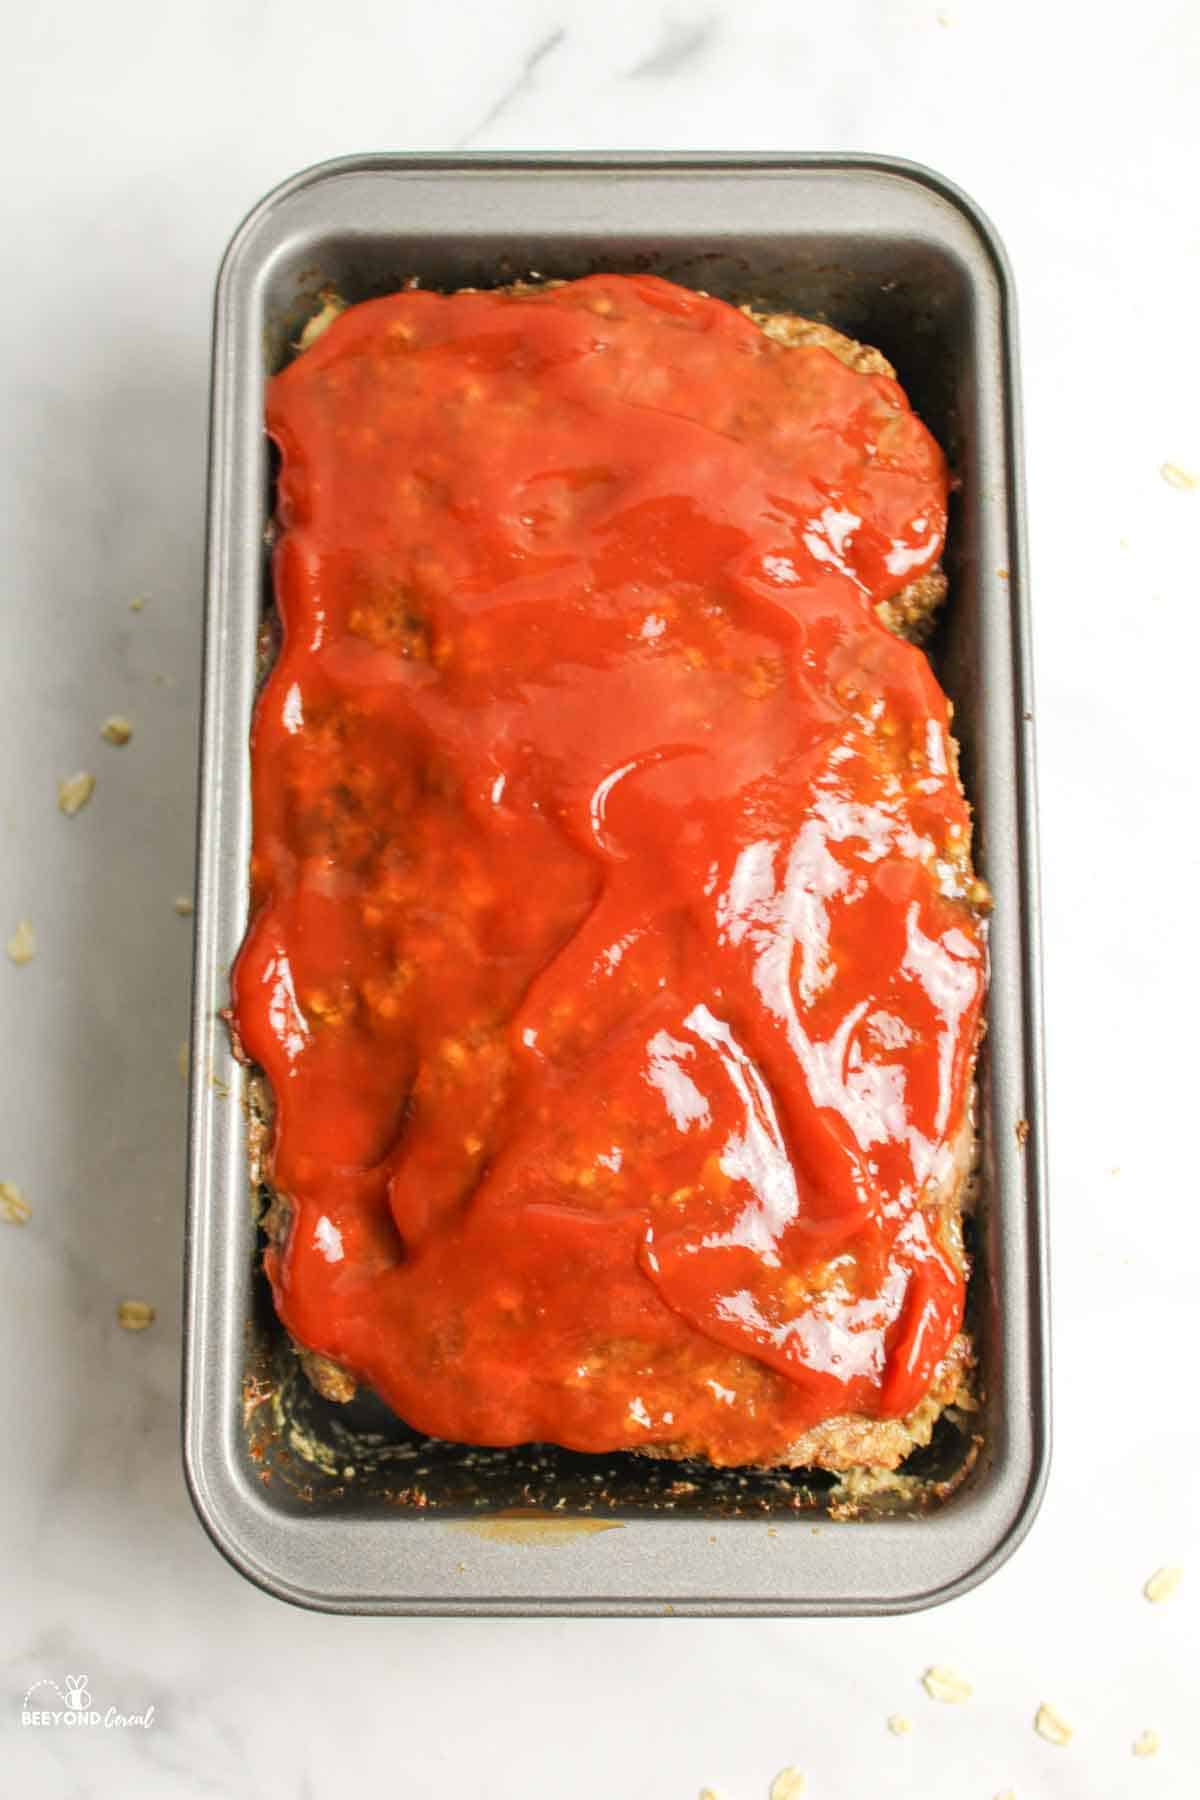 ketchup spread over the top of oatmeal meatloaf in a bread loaf pan